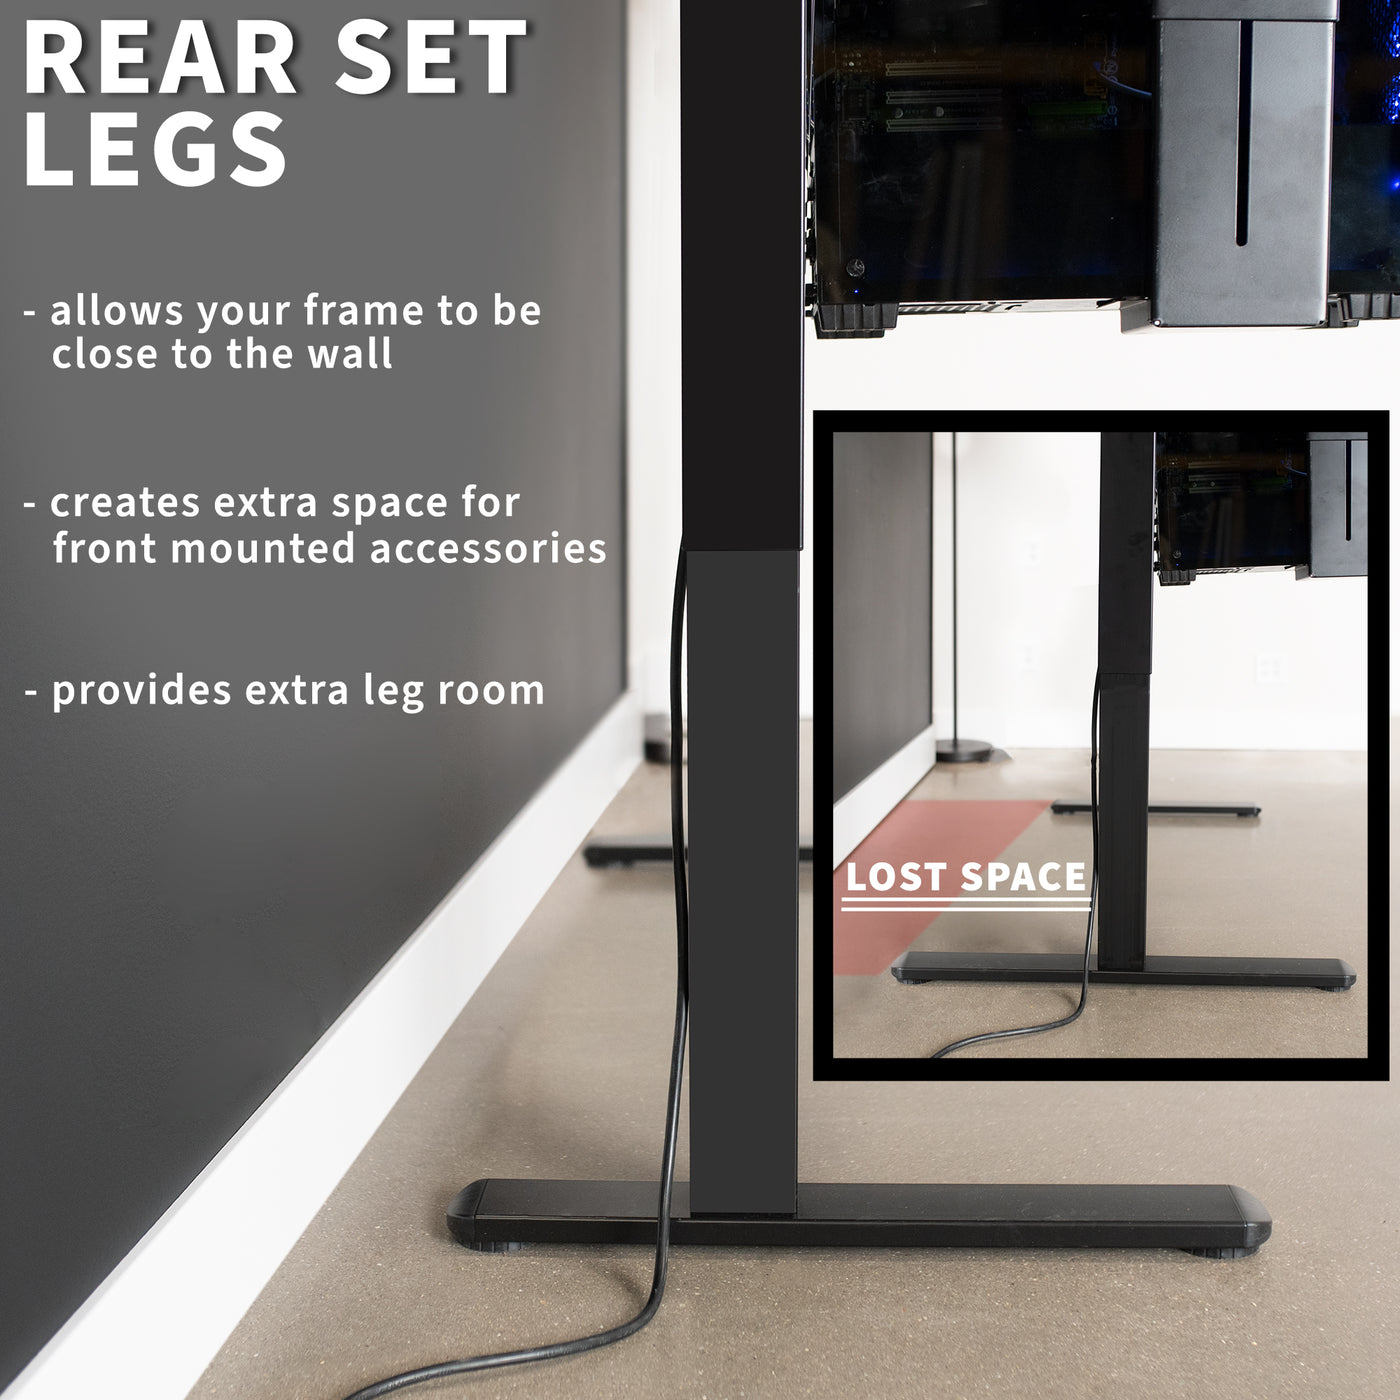 Rear set leg frame allows for your desk to run close to the wall while creating extra space and leg room.